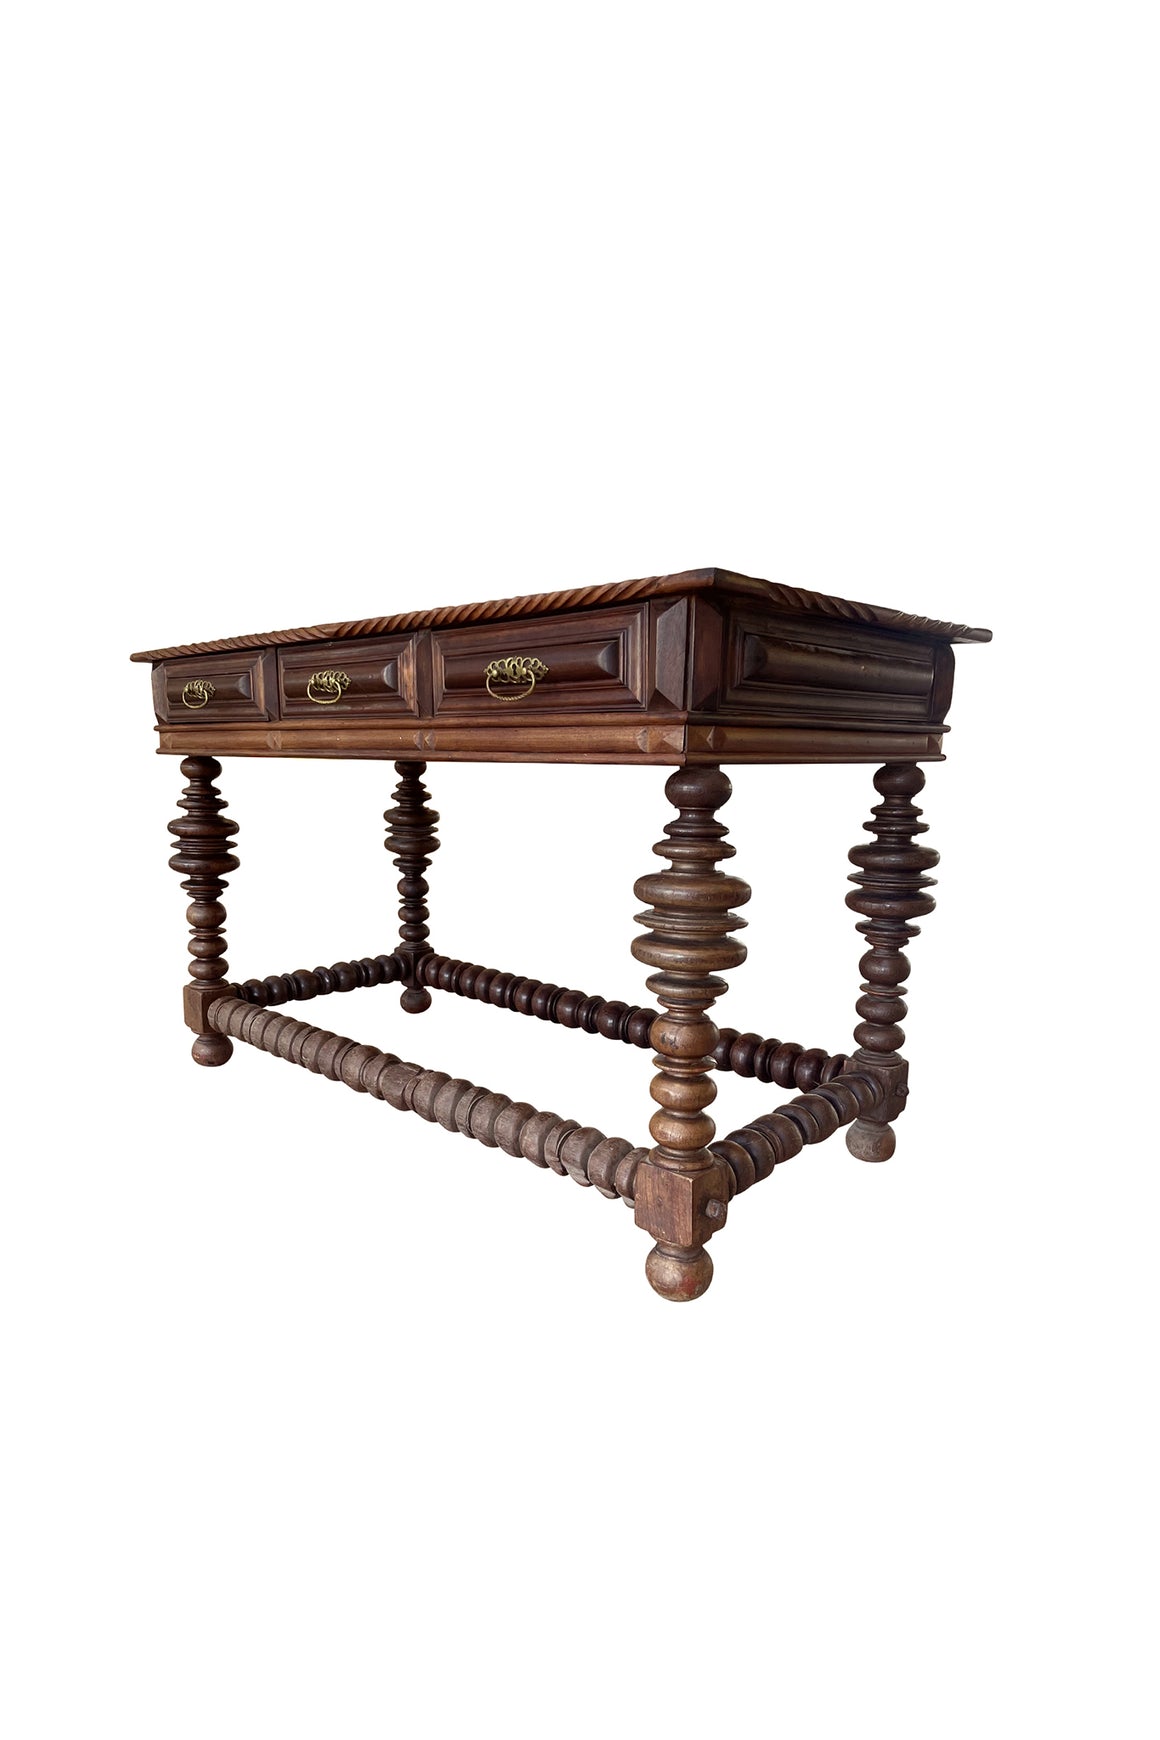 Baroque-Style Portuguese Rosewood Table